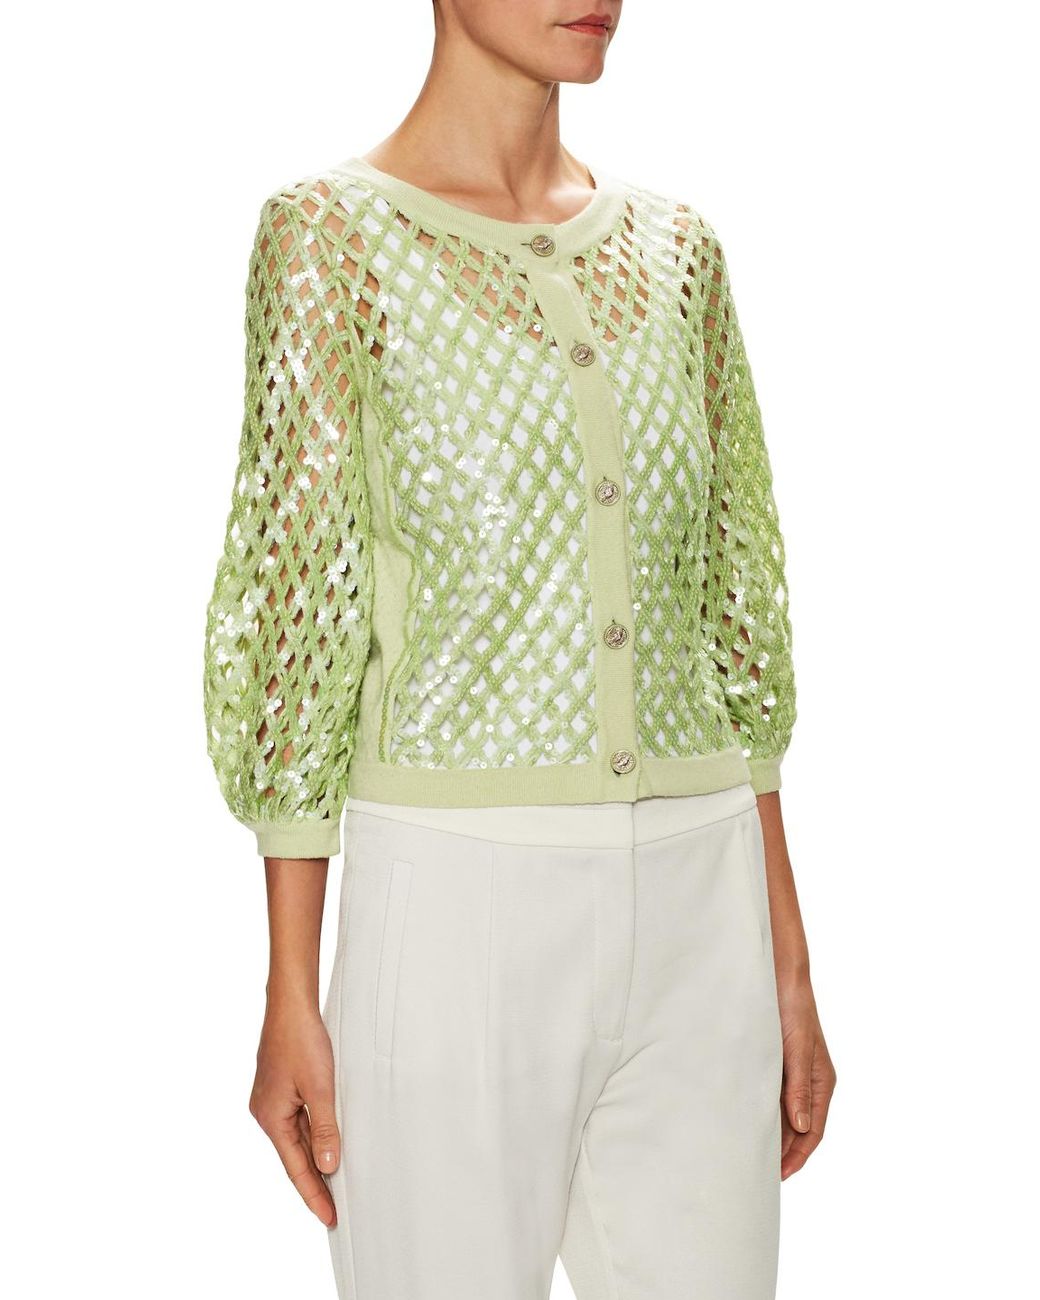 Chanel Vintage Cashmere Sequin Cardigan in Green | Lyst